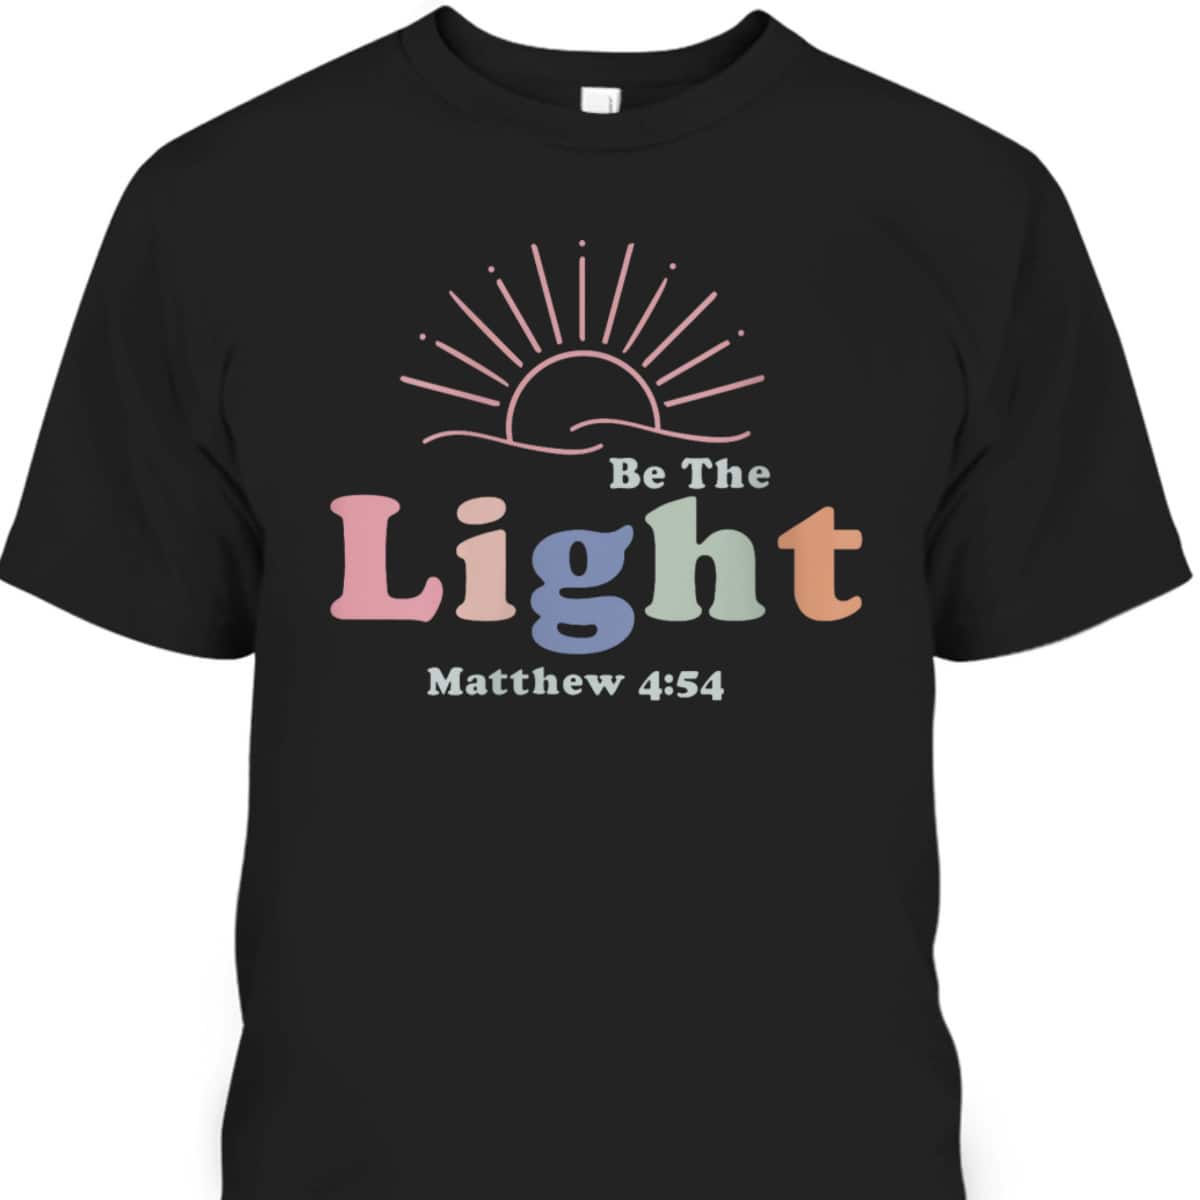 Be The Light Cool Christian Inspirational And Motivational T-Shirt